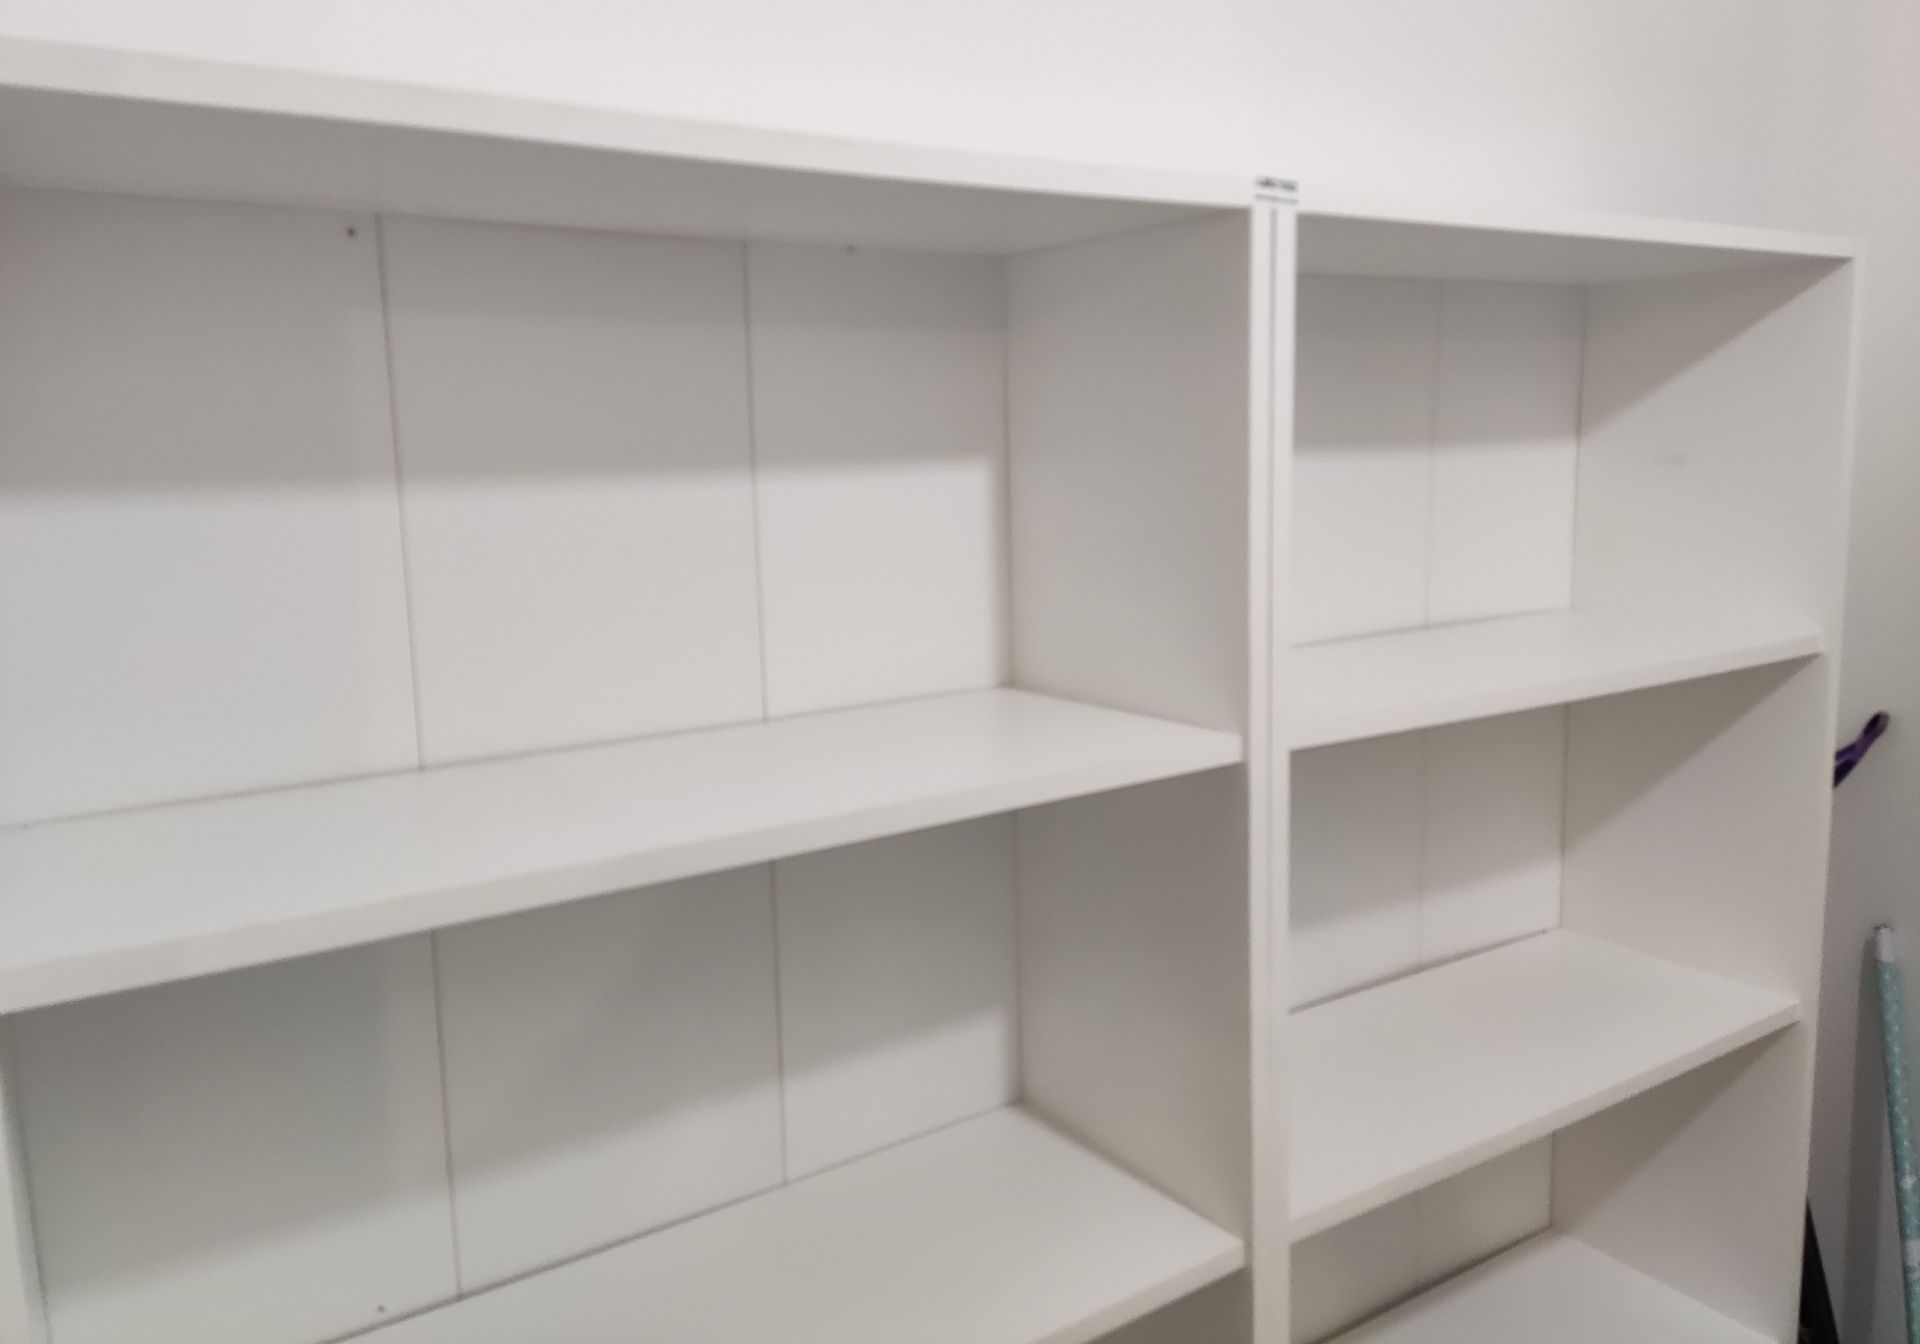 Pair of Tall White Wooden Display Shelving Units - LBC102 - CL763- Location: Sale M33Dimensi - Image 3 of 3